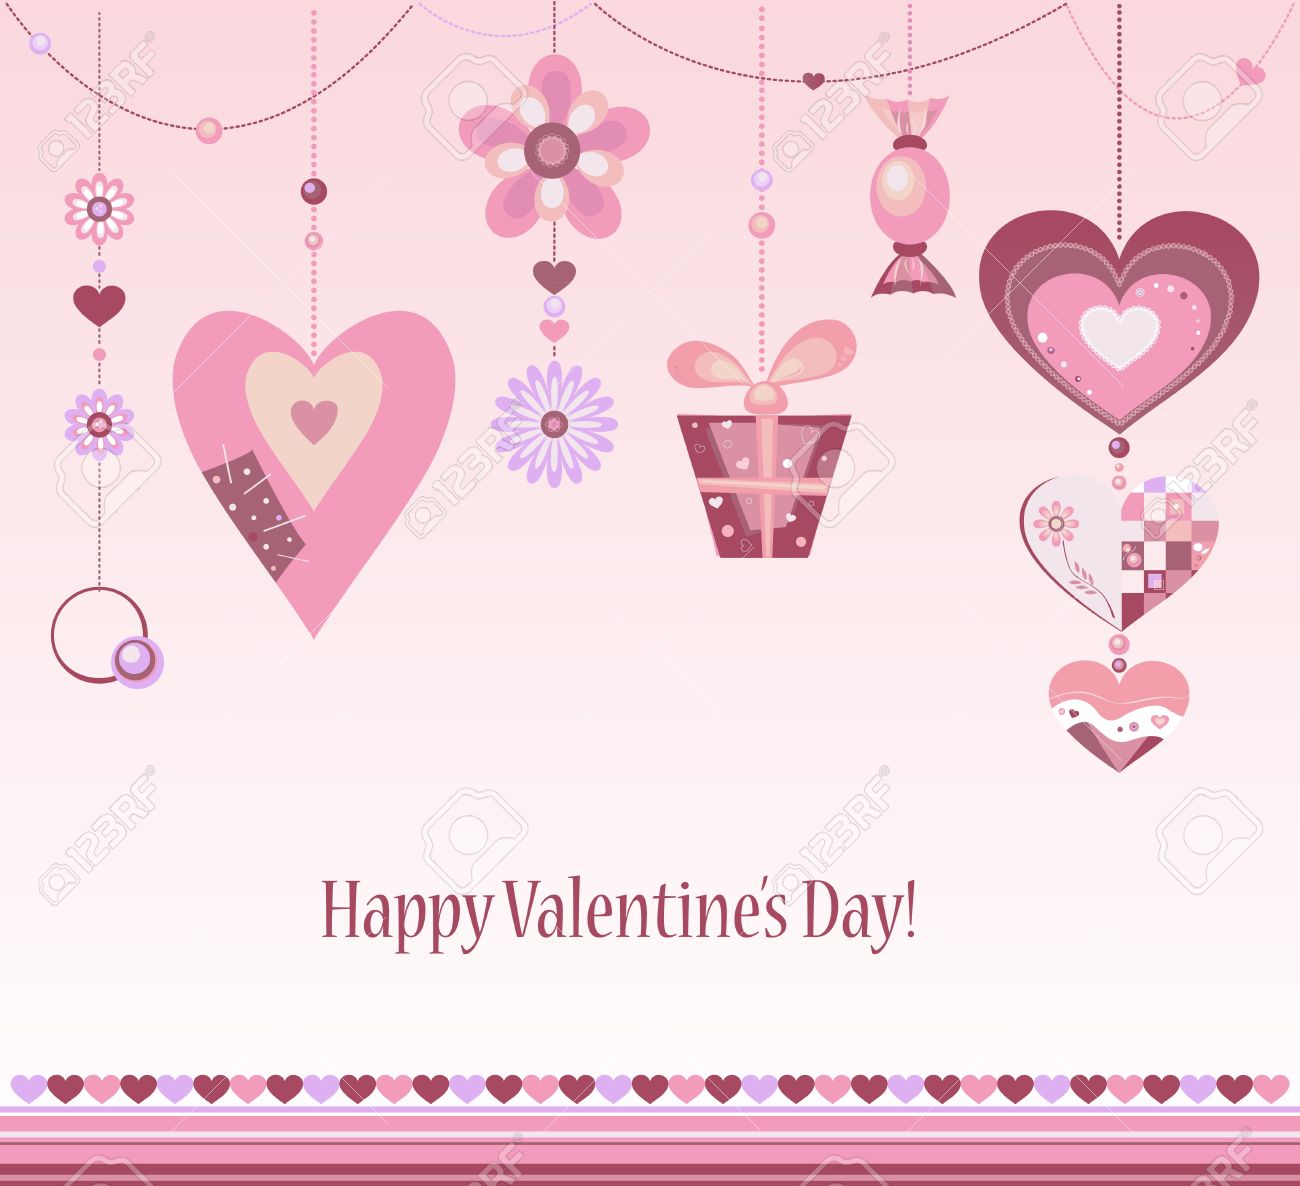 happy valentines day clipart flowers - Clipground